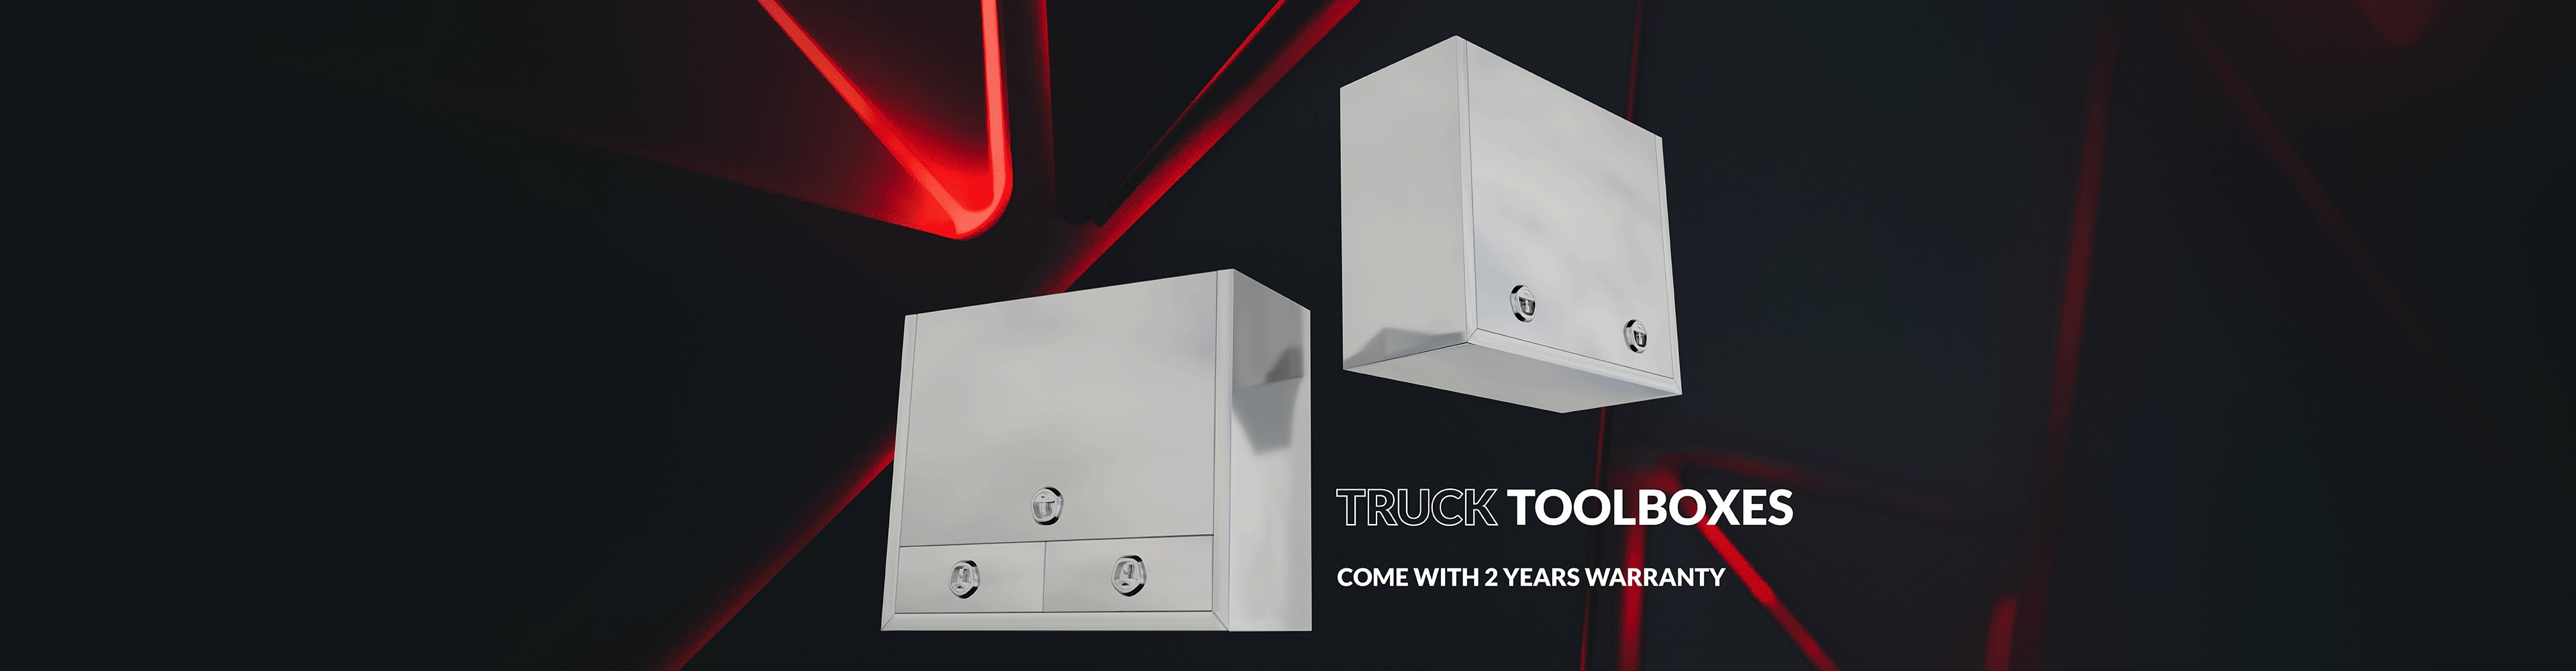 TRUCK TOOLBOXES